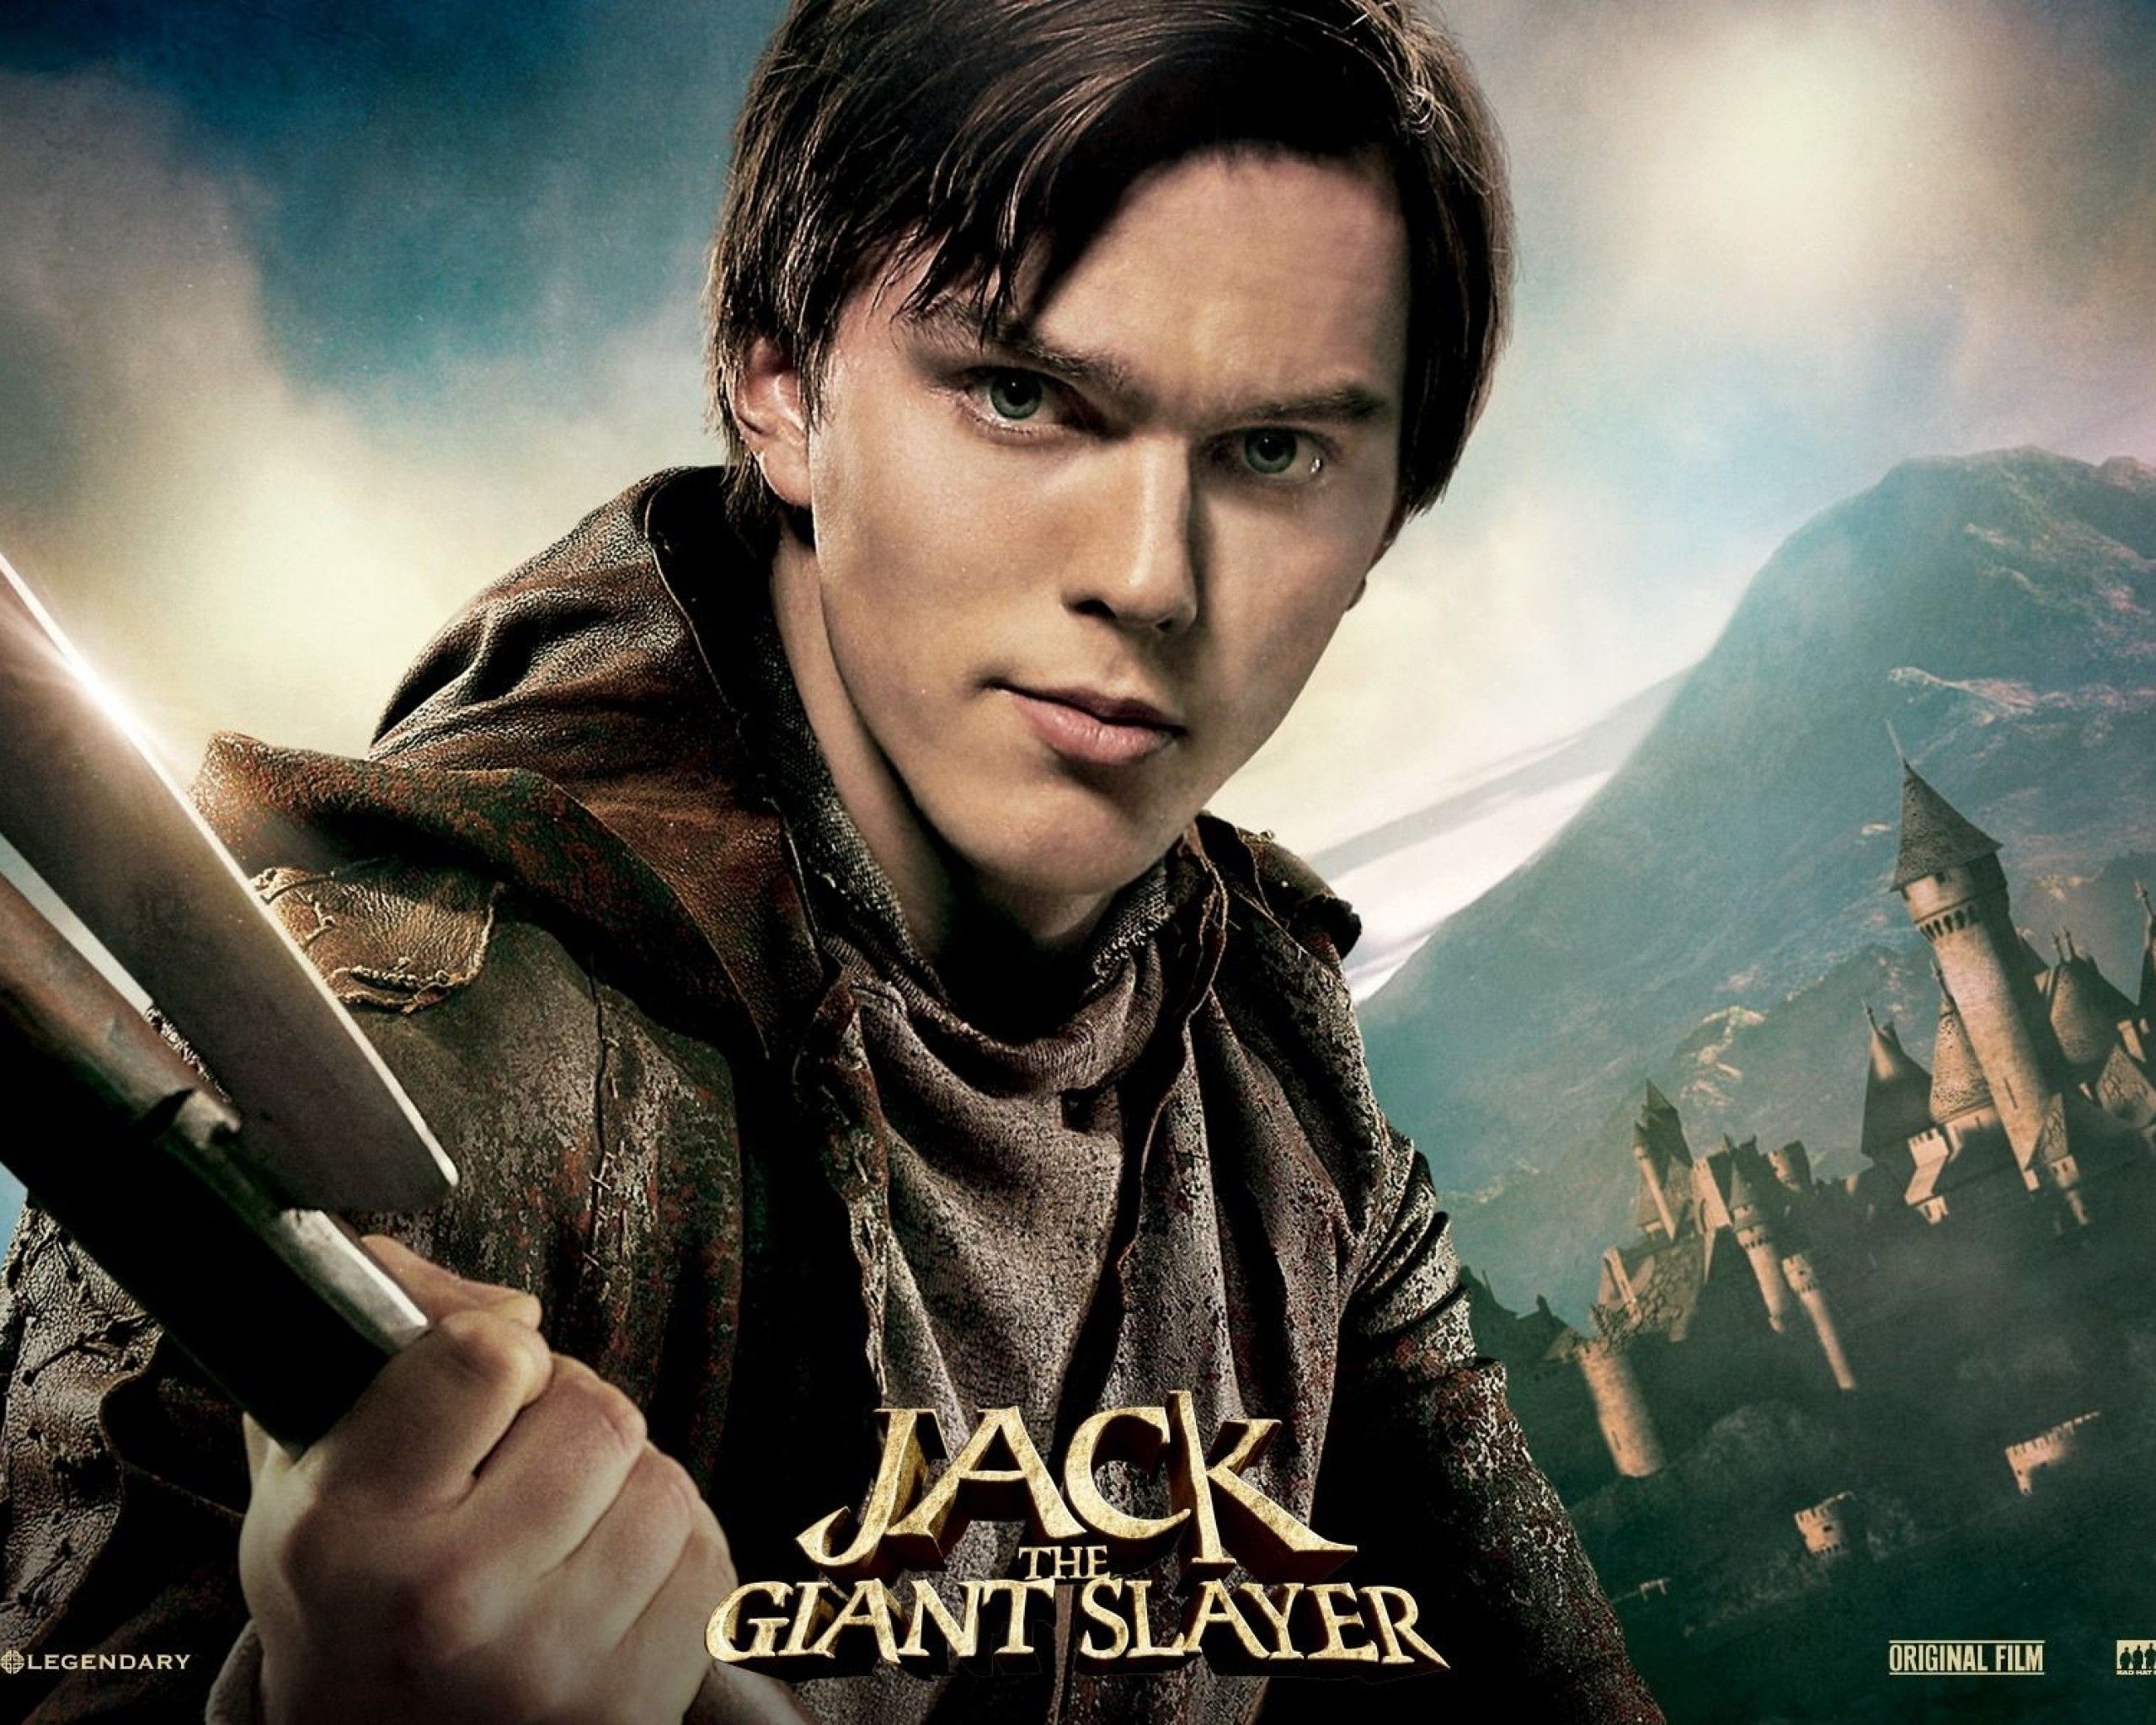 Jack the Giant Slayer Wallpaper. Buffy The Vampire Slayer Wallpaper, Slayer Eagle Wallpaper and Jack the Giant Slayer Wallpaper